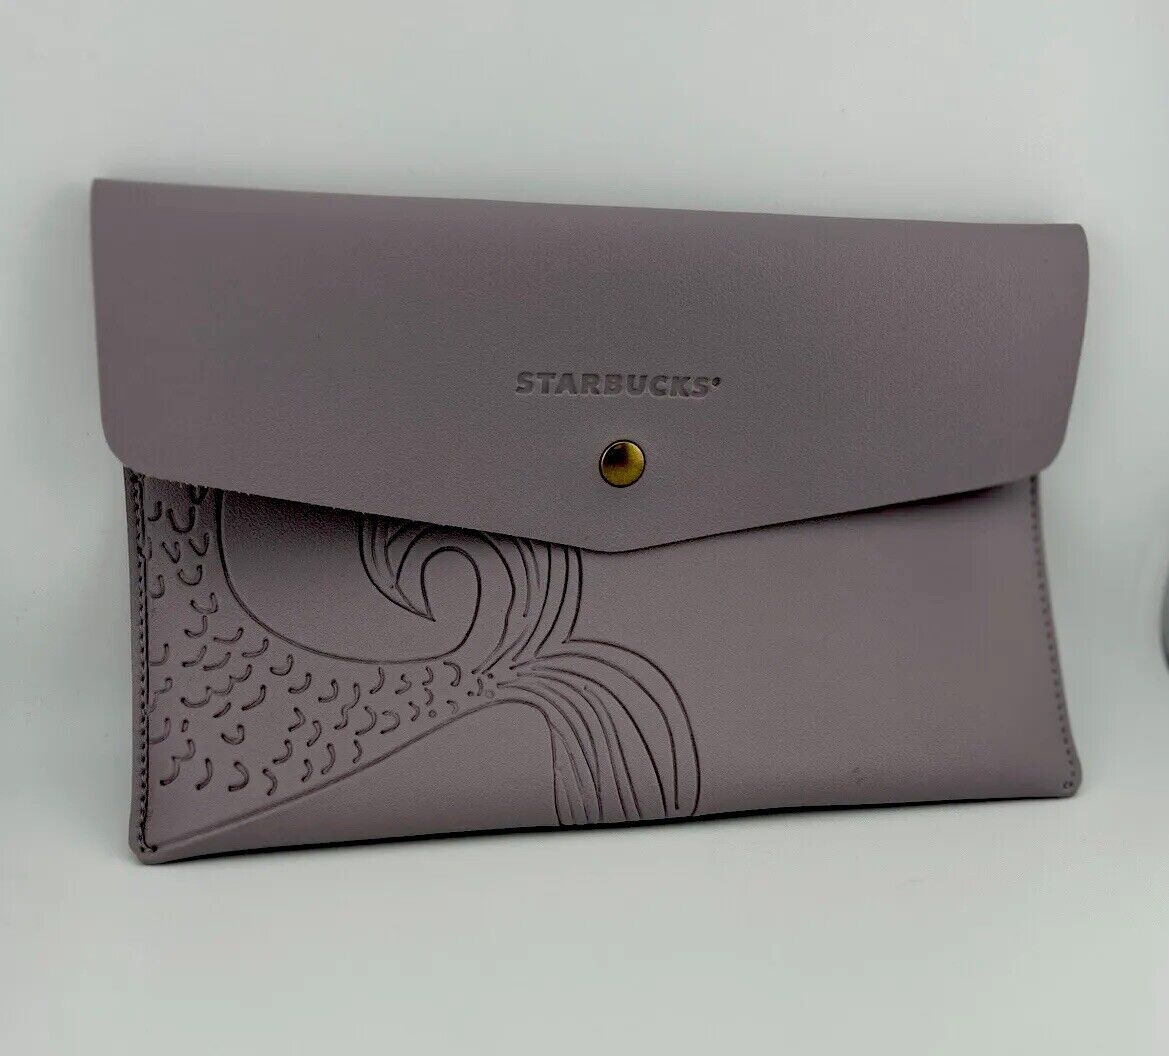 Starbucks Lilac Clutch, Card Holder, Leather, Siren Tail, Limited Edition 10x6